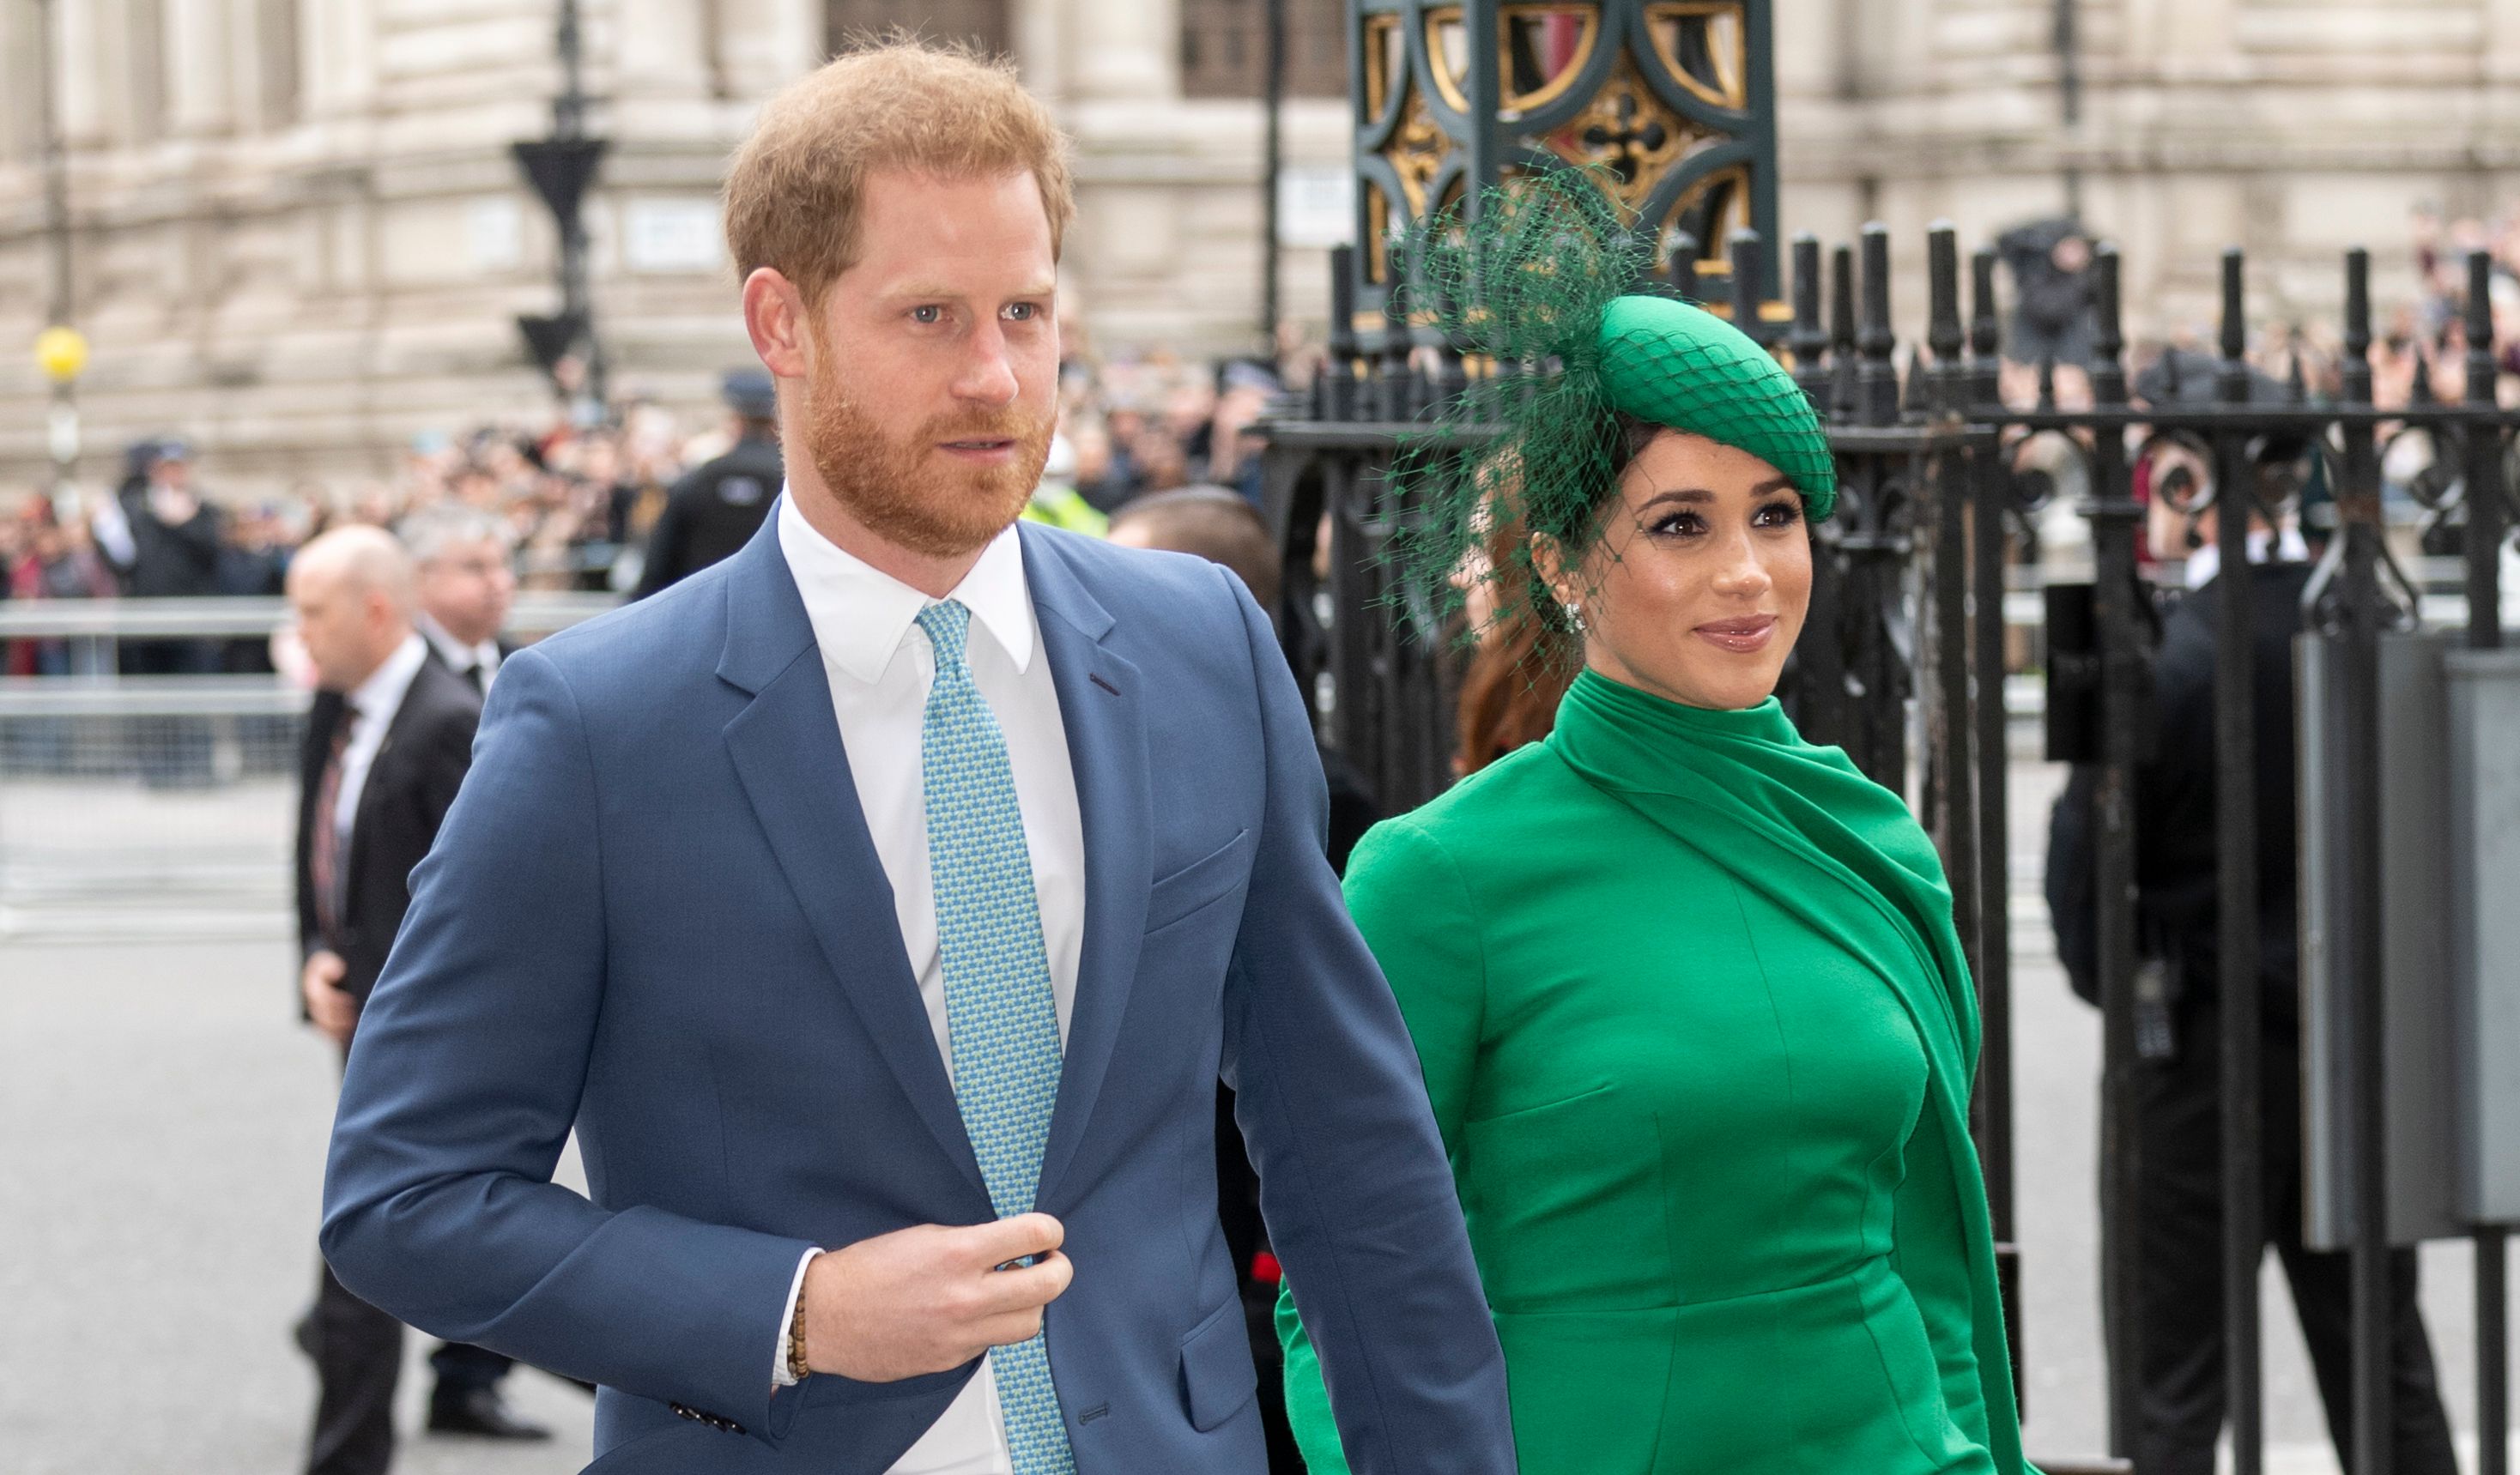 Prince Harry and Meghan at the Commonwealth Day Service 2020 at Westminster Abbey on March 9, 2020 | Photo: Getty Images